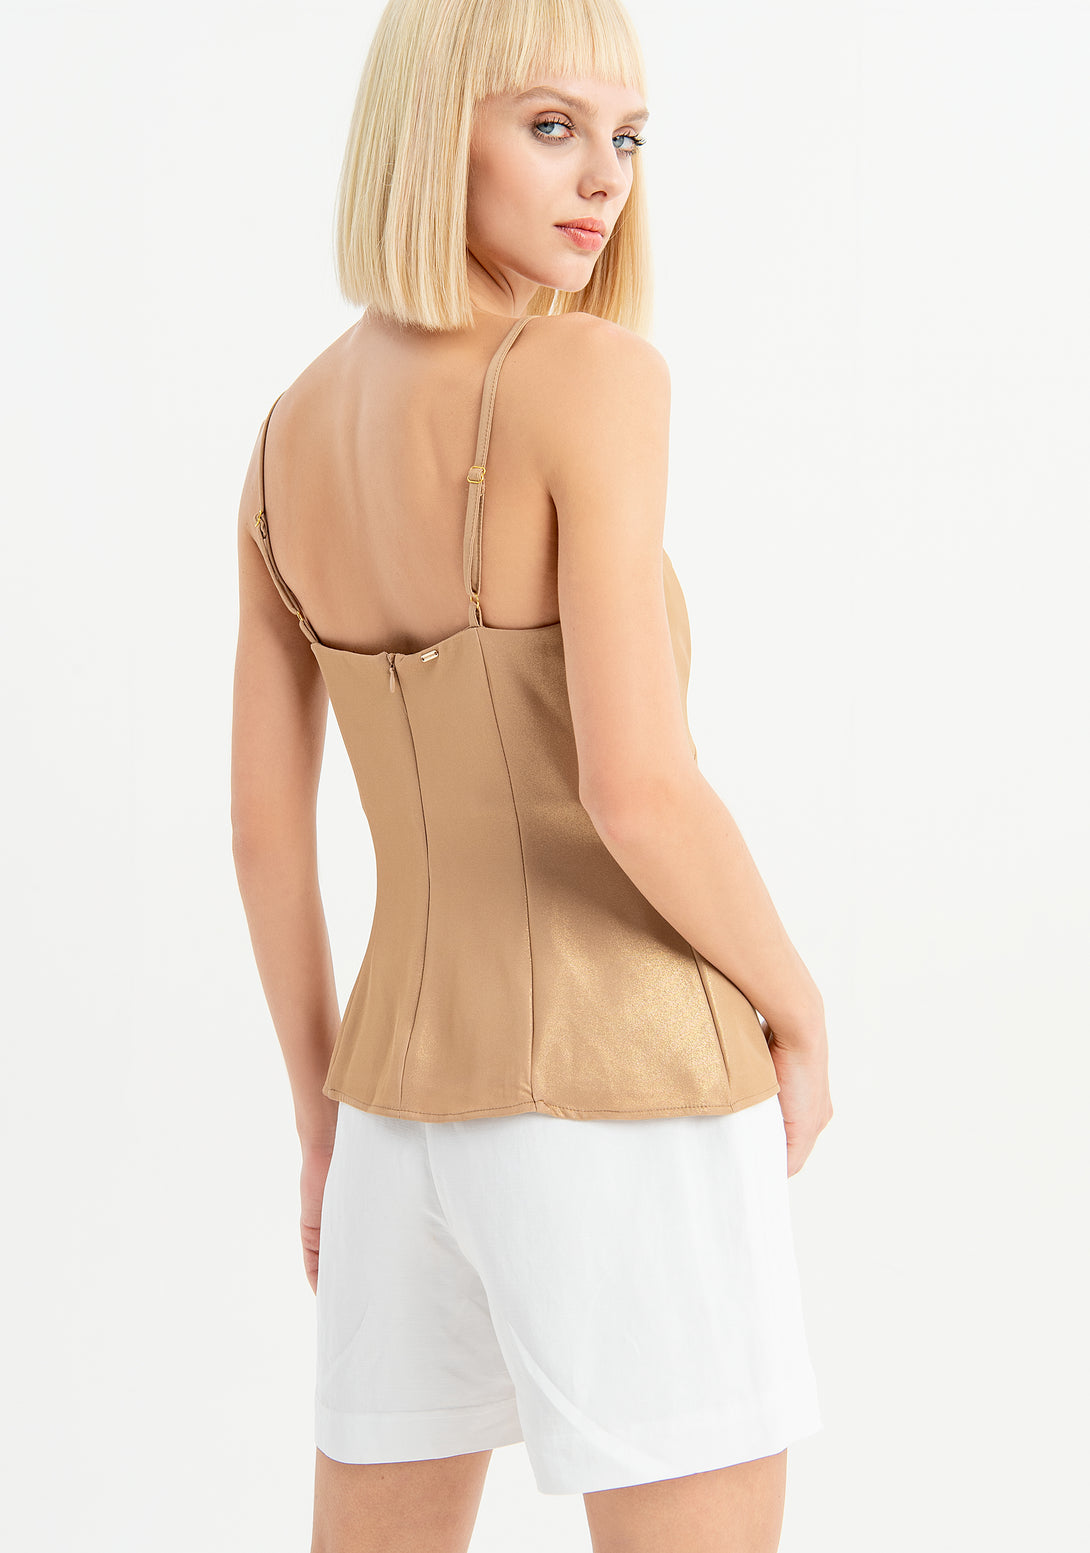 Strapless top with pinces